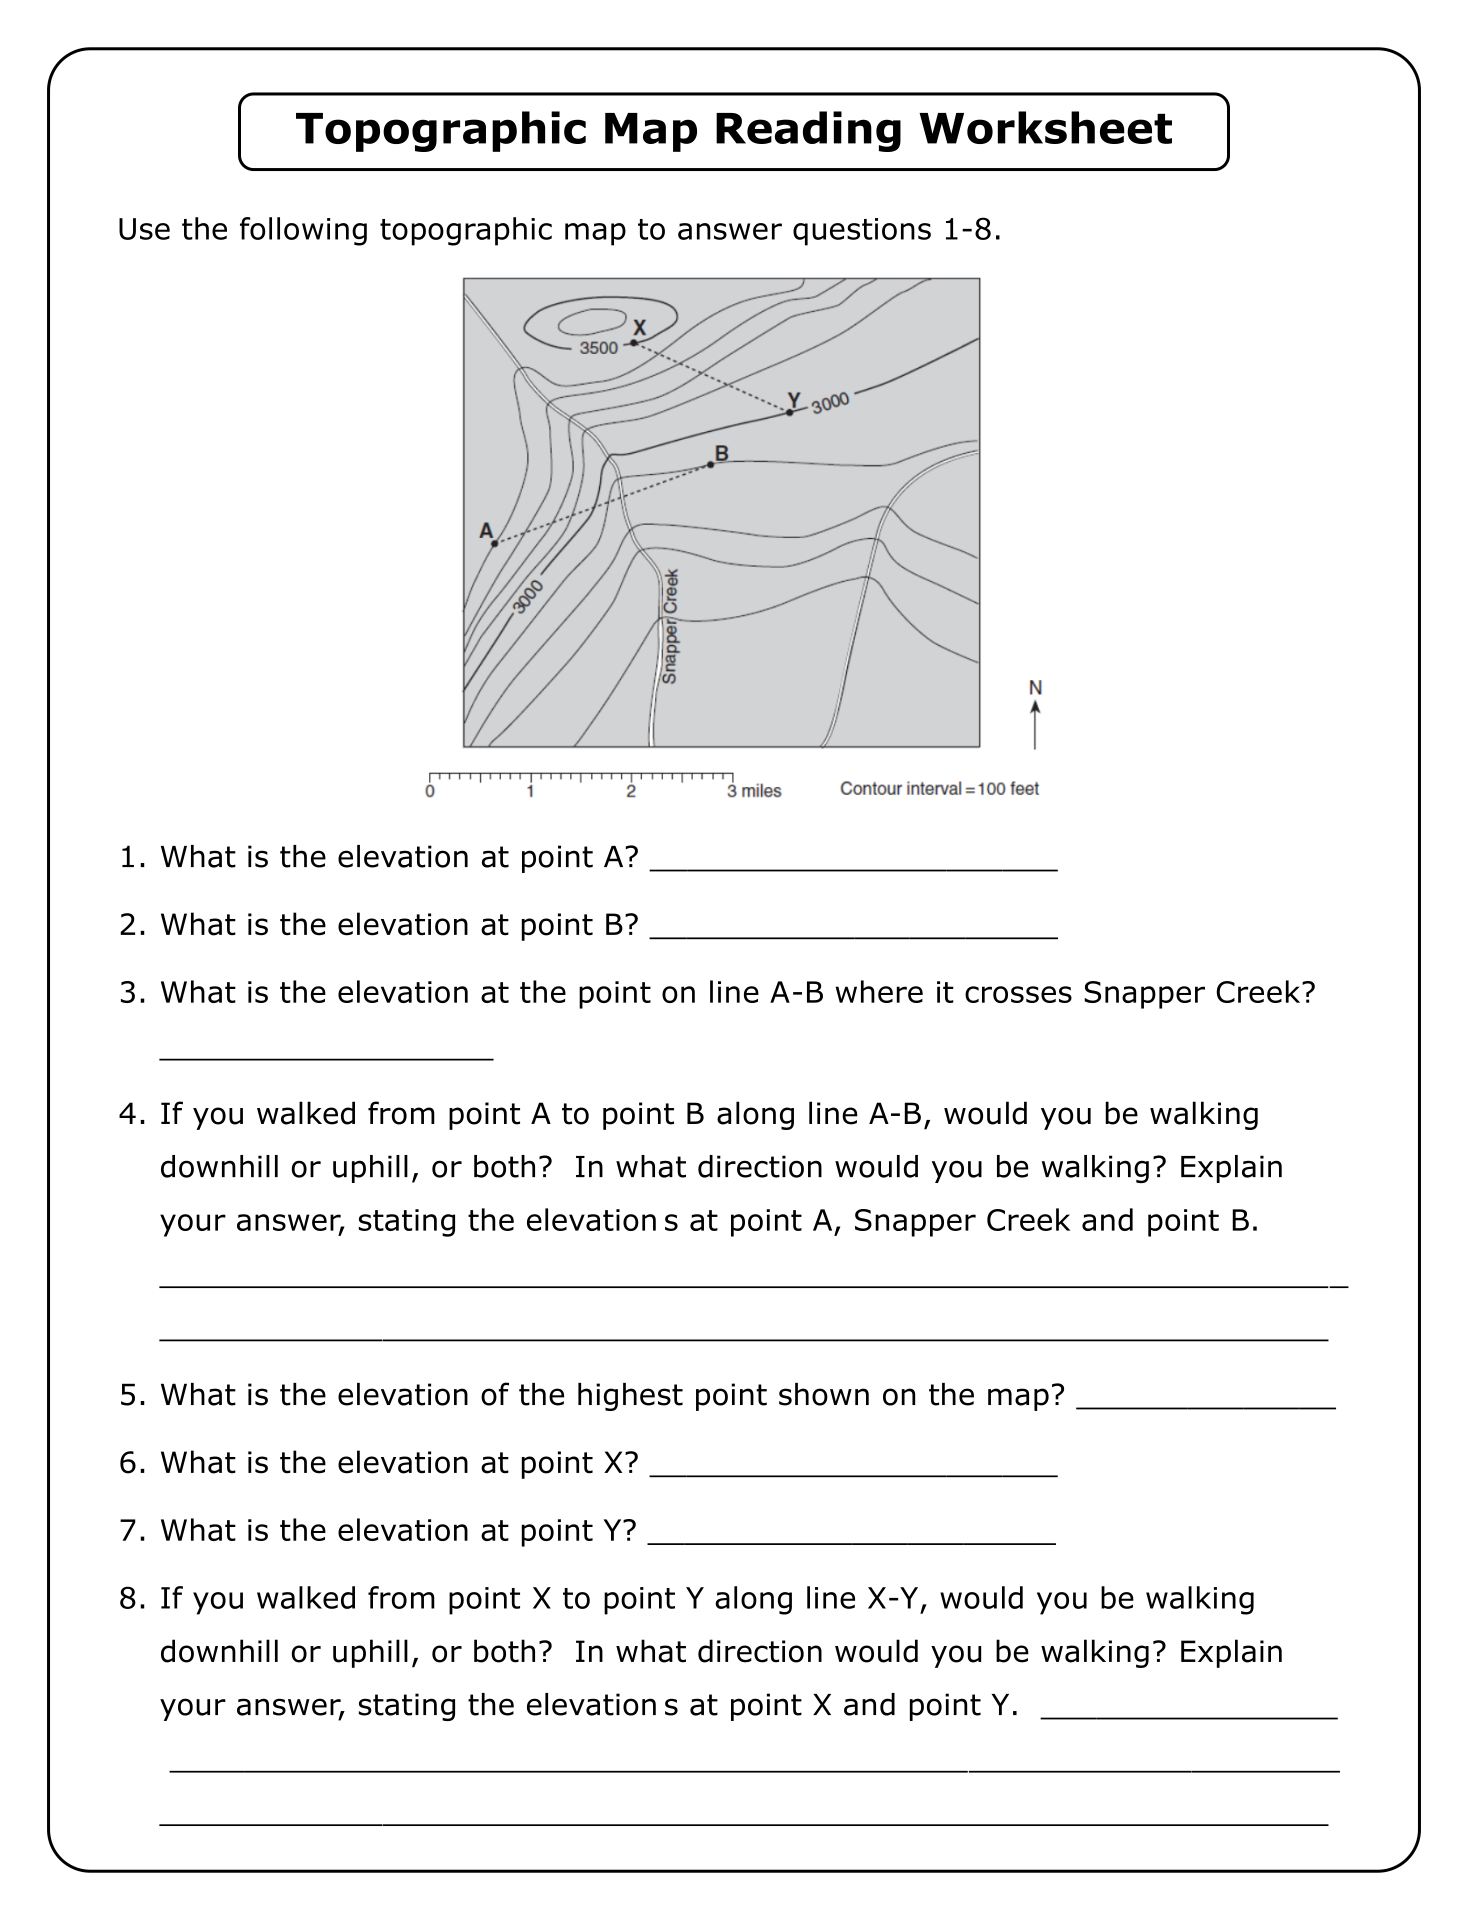 11 Best Topographic Map Worksheets Printable - printablee.com Throughout Topographic Map Reading Worksheet Answers